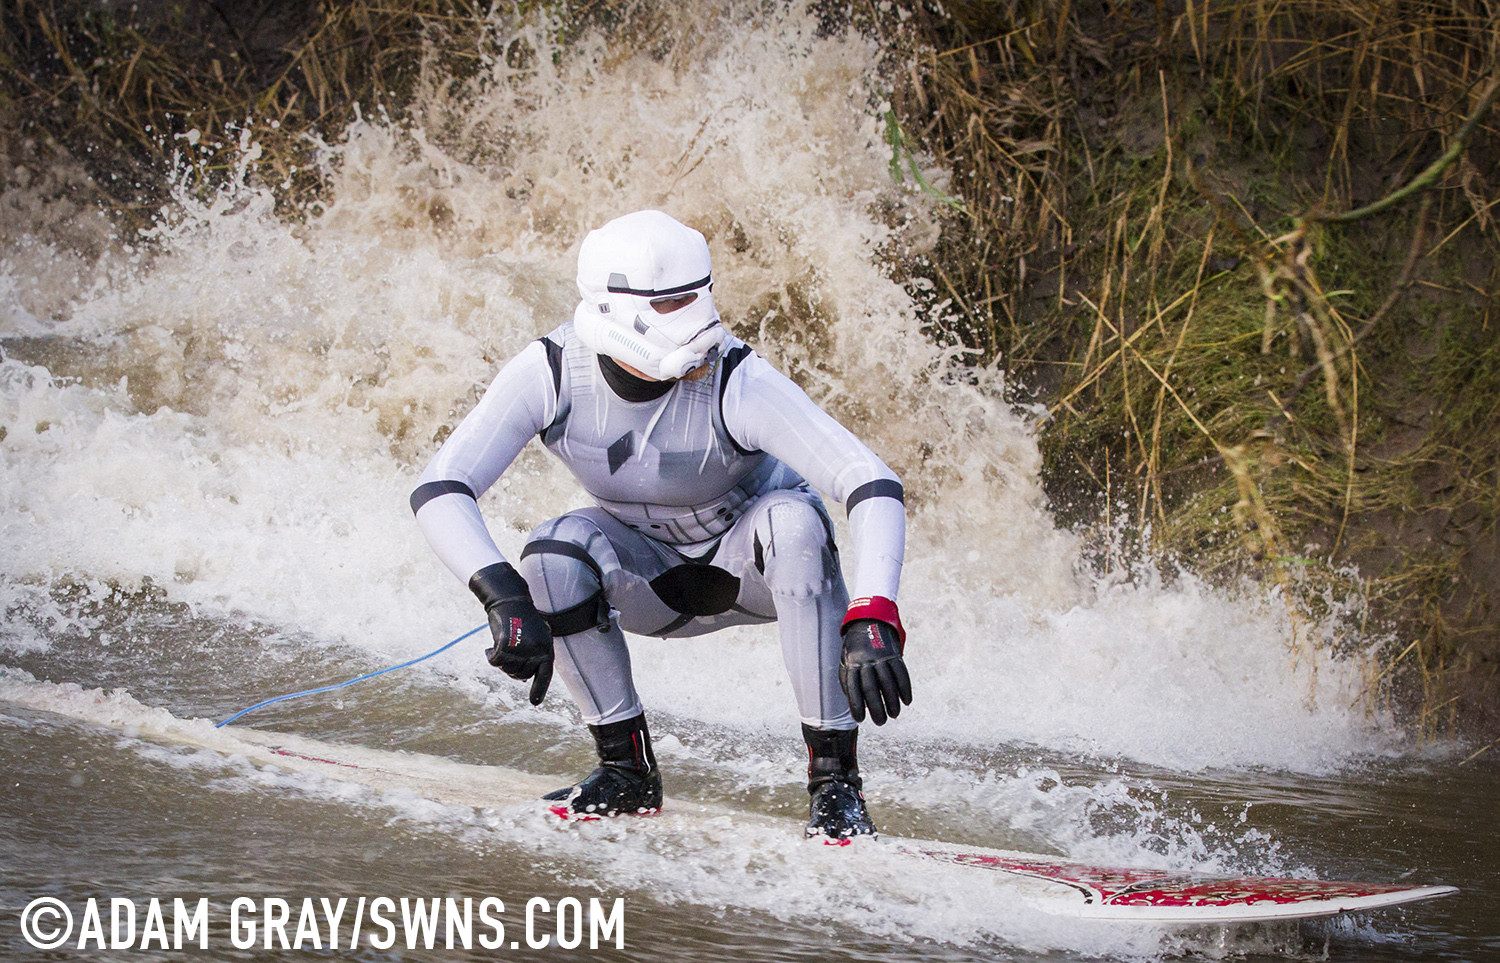 A surfer dressed as a Star Wars Stormtrooper rides the Severn Bore in Gloucestershire. 27 November 2015. See SWNS story SWTROOPER: There was an unworldly sight in the Forest of Dean this morning (Friday 27th November) when a trio of Star Wars Stormtroopers surfed the spectacular Severn Bore. Key scenes from the upcoming Star Wars episode VII were filmed in nearby Puzzlewood and can be seen several times in the trailer. Swapping the Death Star for surfboards, the elite soldiers of the Galactic Empire took to the waves to mark the release of the highly anticipated new Star Wars film and a new TV & Movie Trail. The Forest of Dean’s atmospheric and picturesque location provided a natural stage for the film, which director J.J Abrams referenced in a thank you letter to all of the movie's cast and crew.